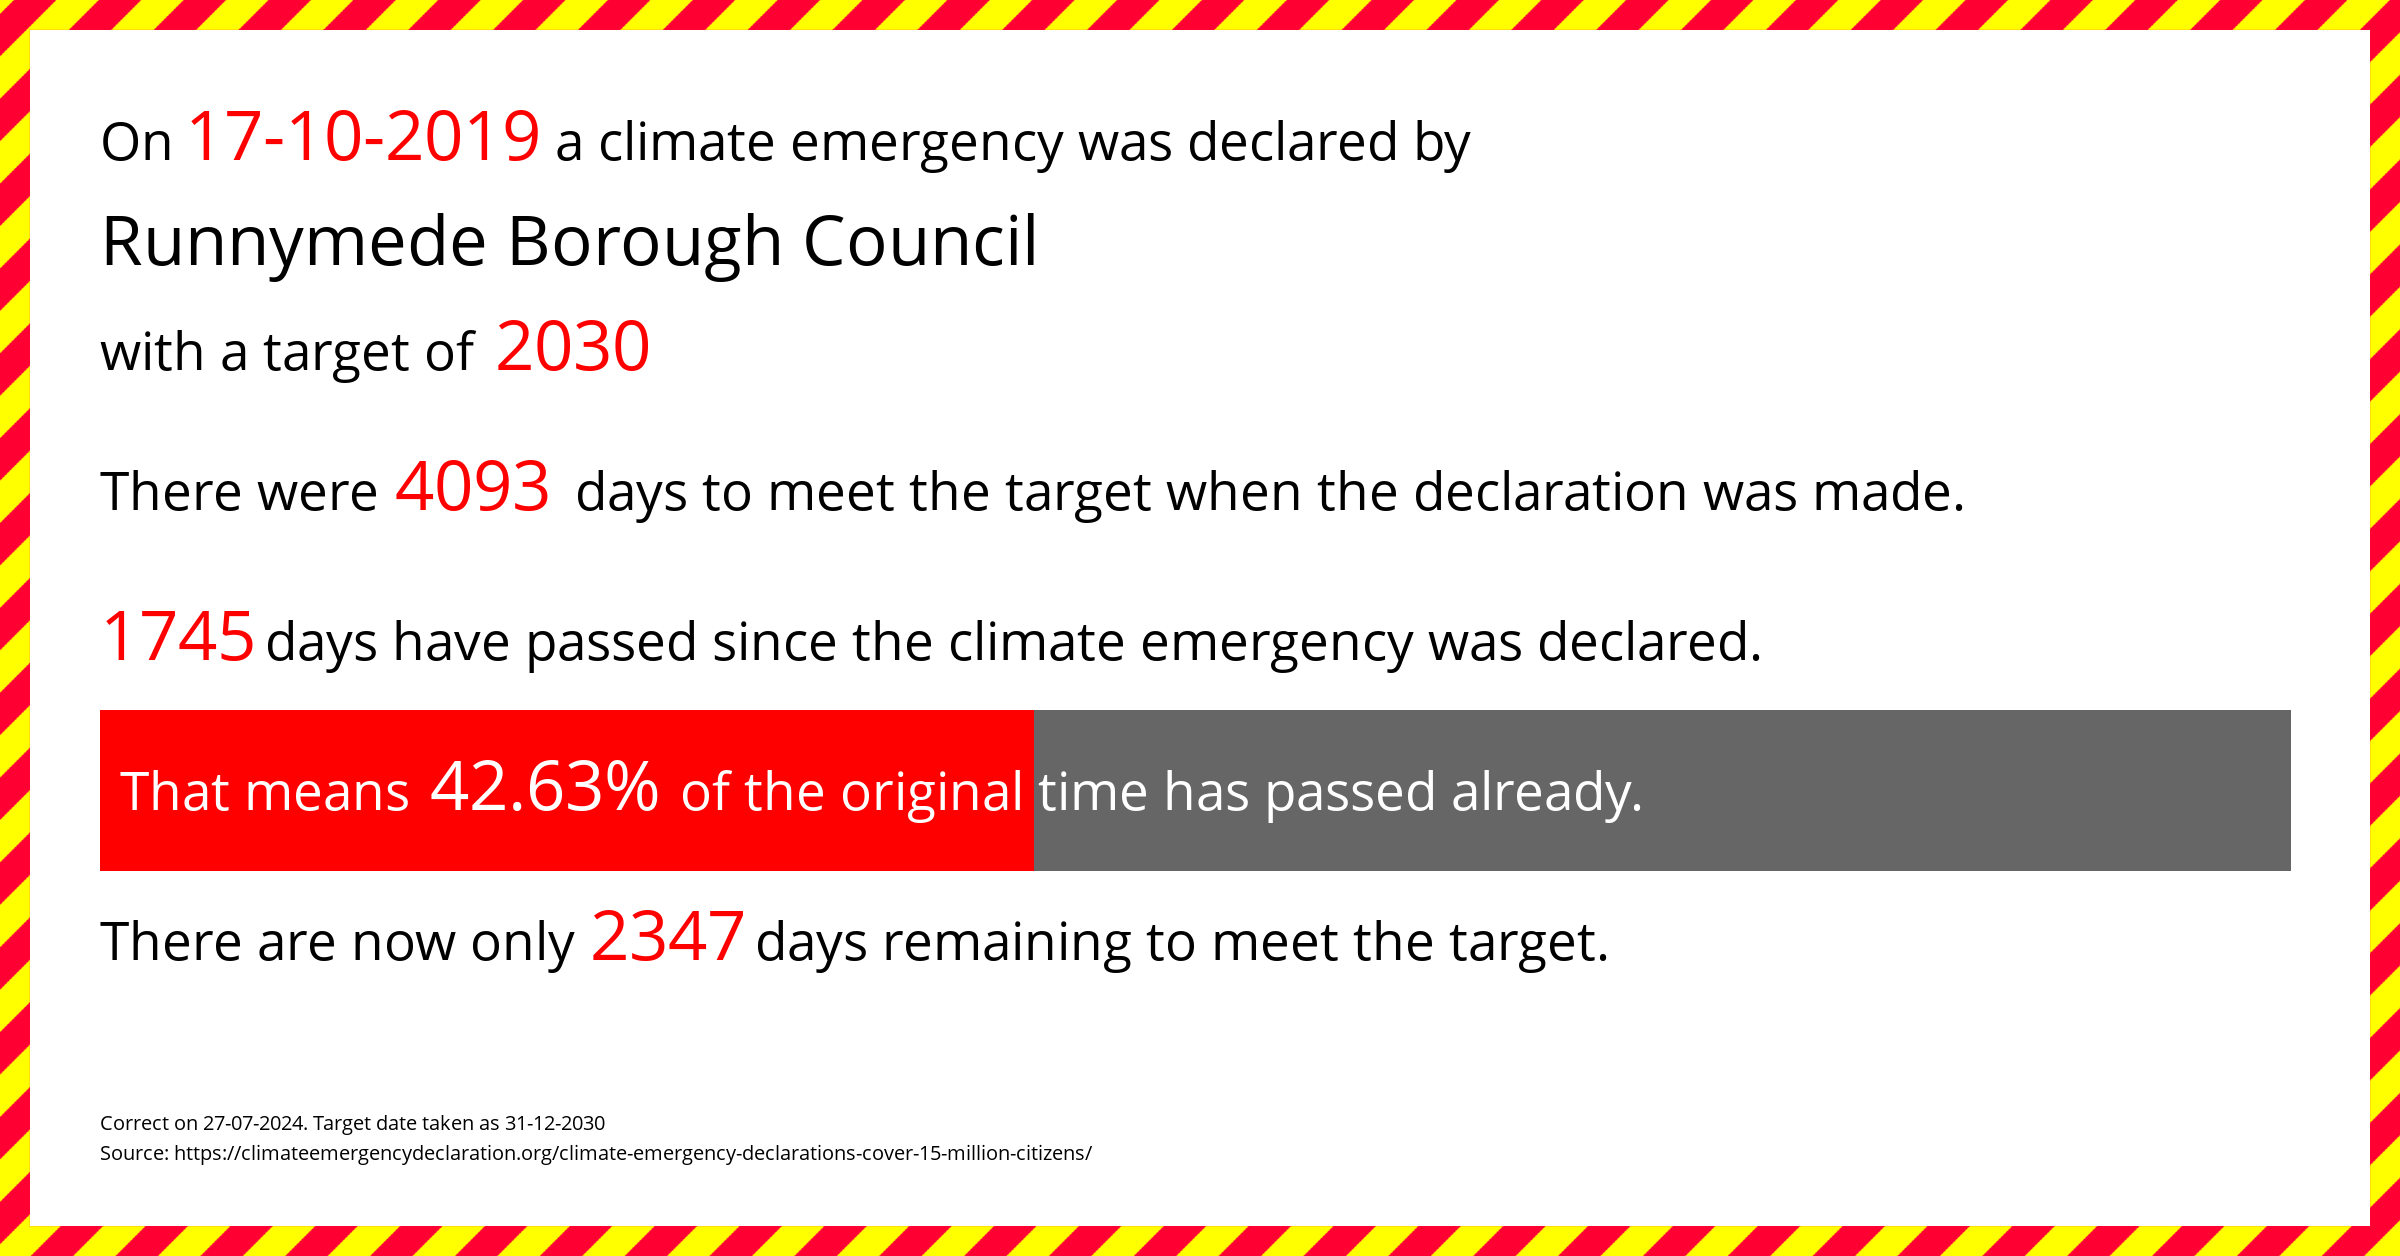 Runnymede Borough Council  declared a Climate emergency on Thursday 17th October 2019, with a target of 2030.